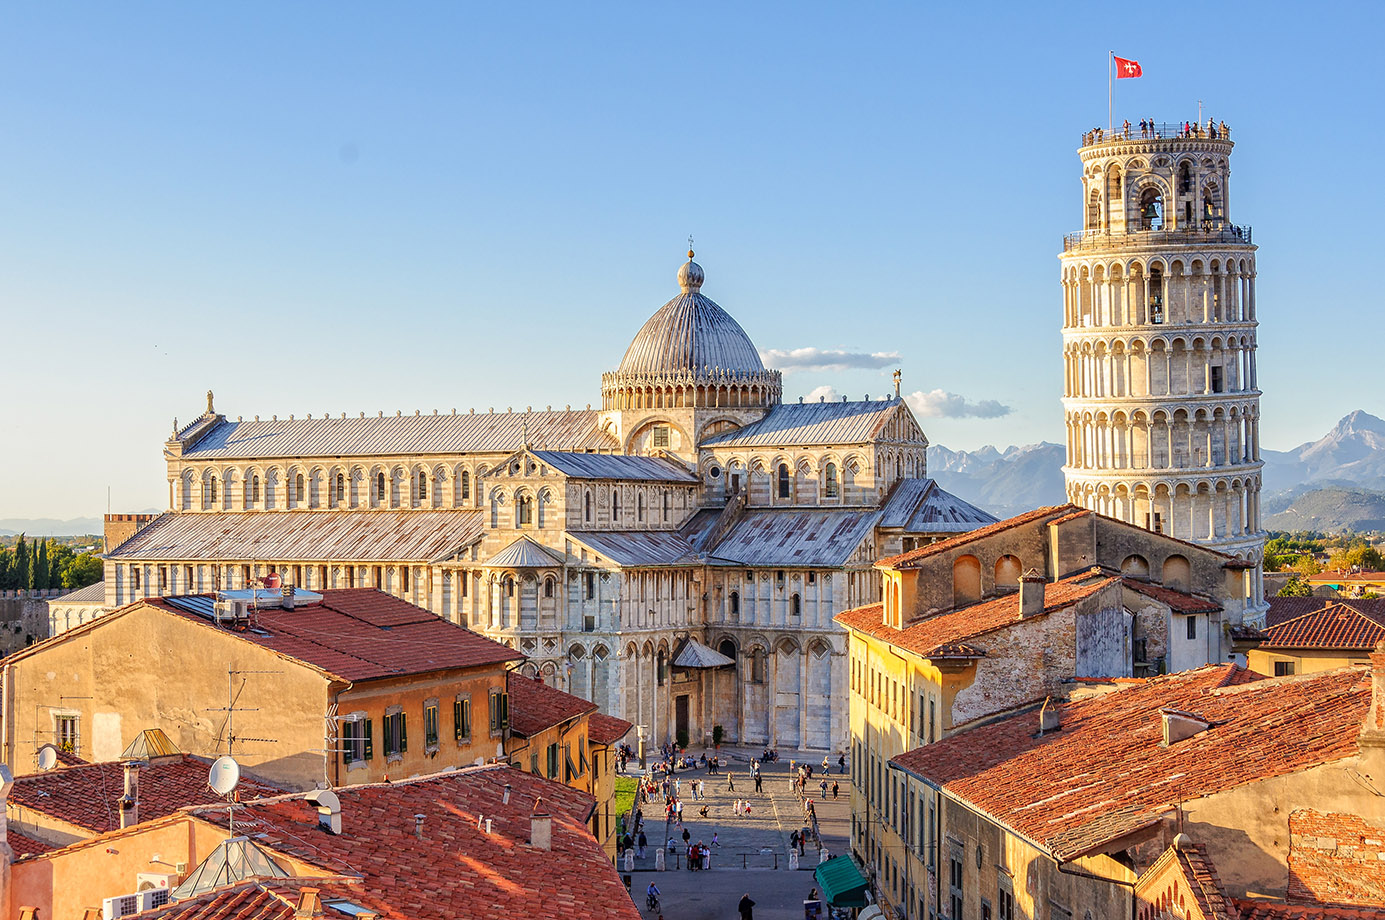 flydubai launches flights to Pisa in Italy, resumes operations to Catania in Sicily